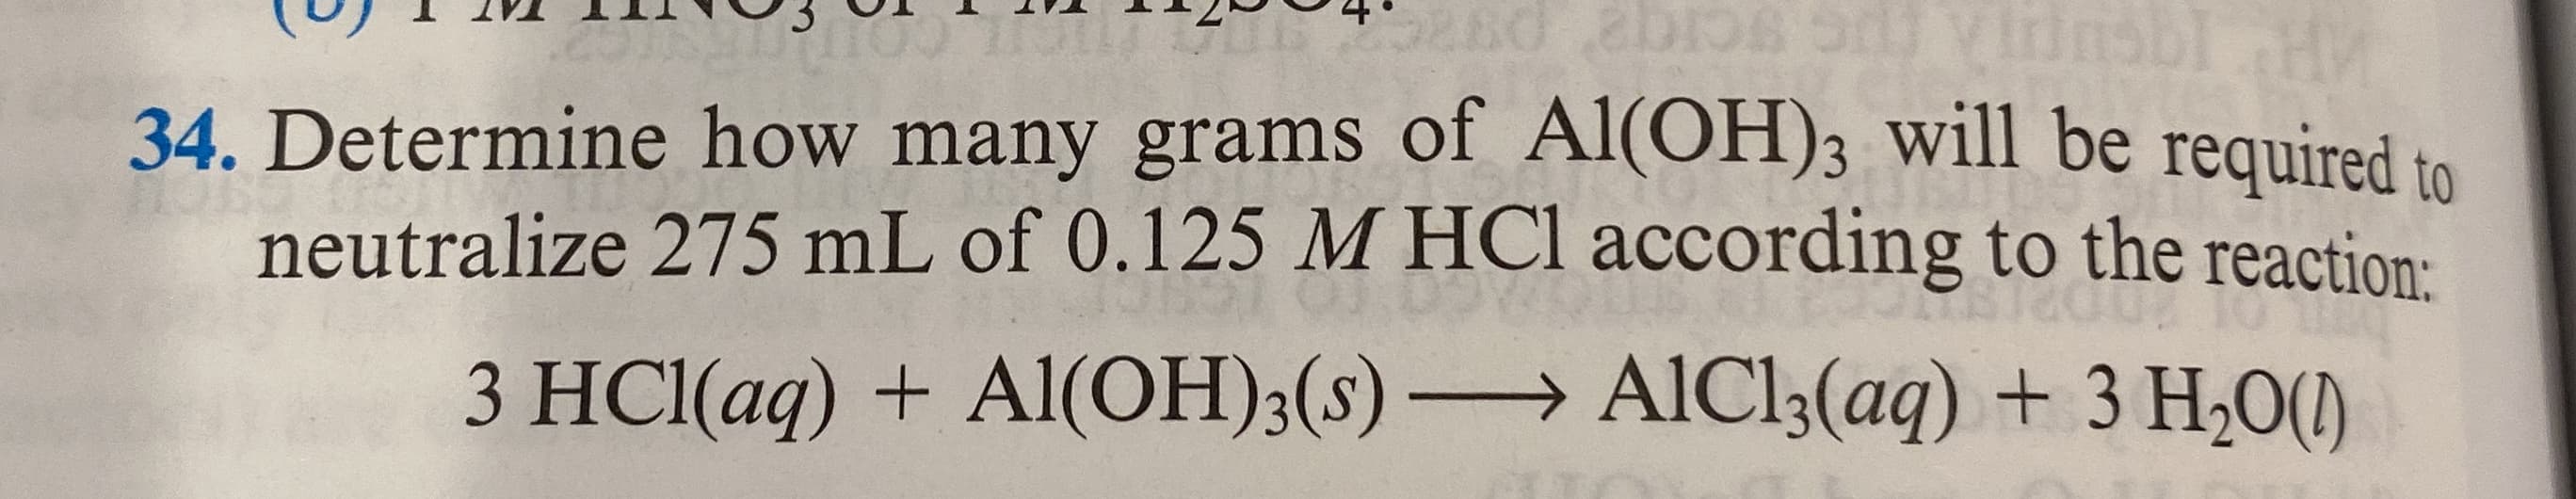 34. Determine how many grams of Al(OH)3 will be required to
neutralize 275 mL of 0.125 M HCl according to the reaction:
3 HCl(aq) + Al(OH);(s) AlCl3(aq) + 3 H,0()
